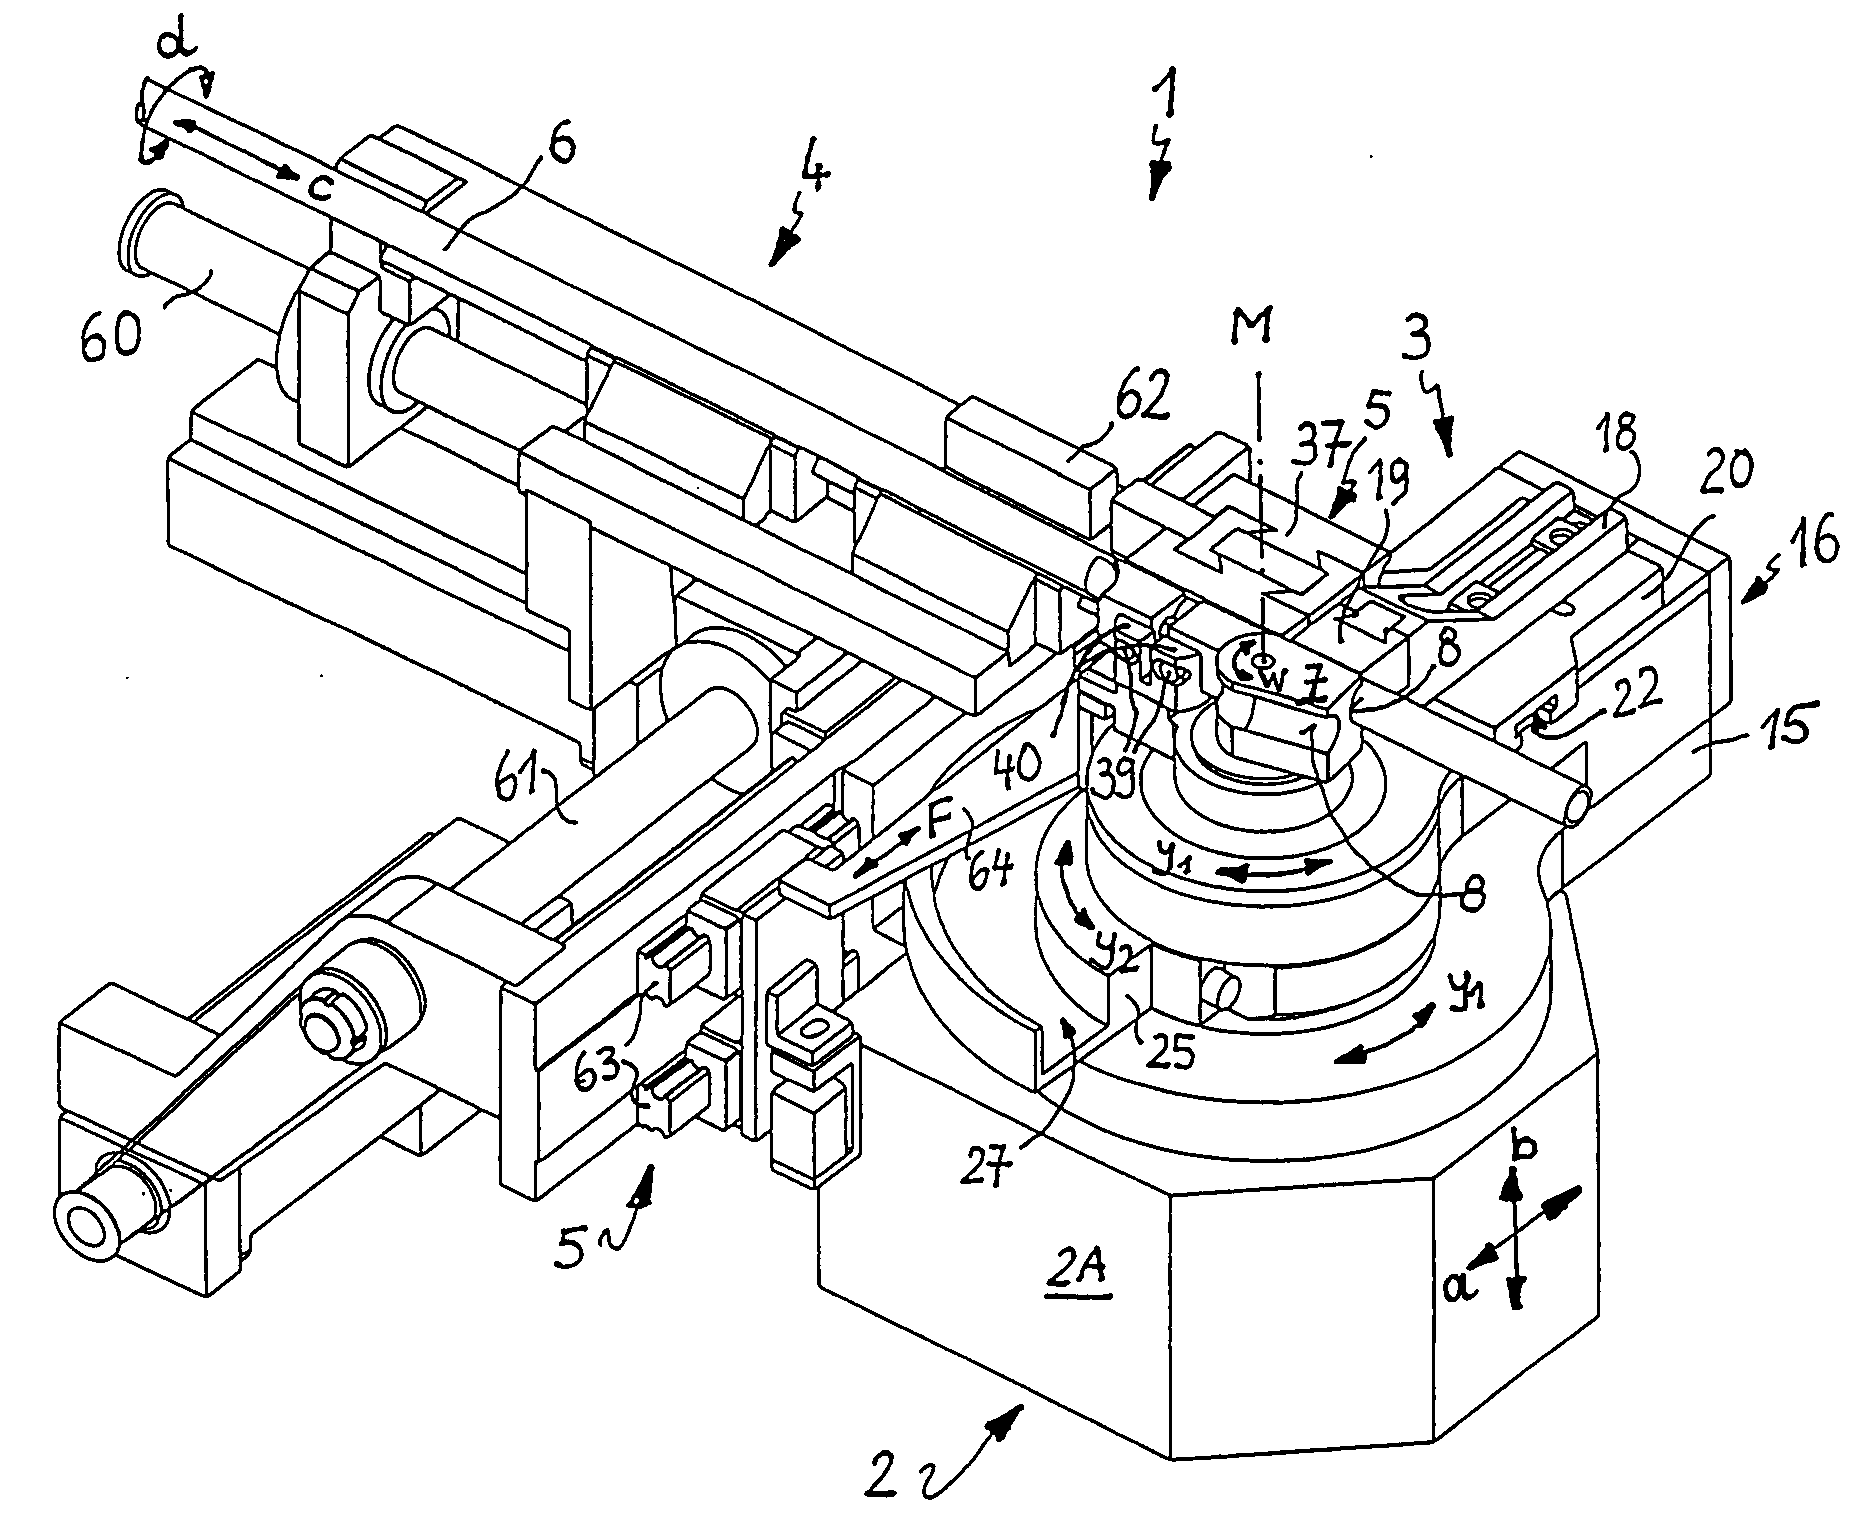 Machine for bending rod-shaped or tubular workpieces